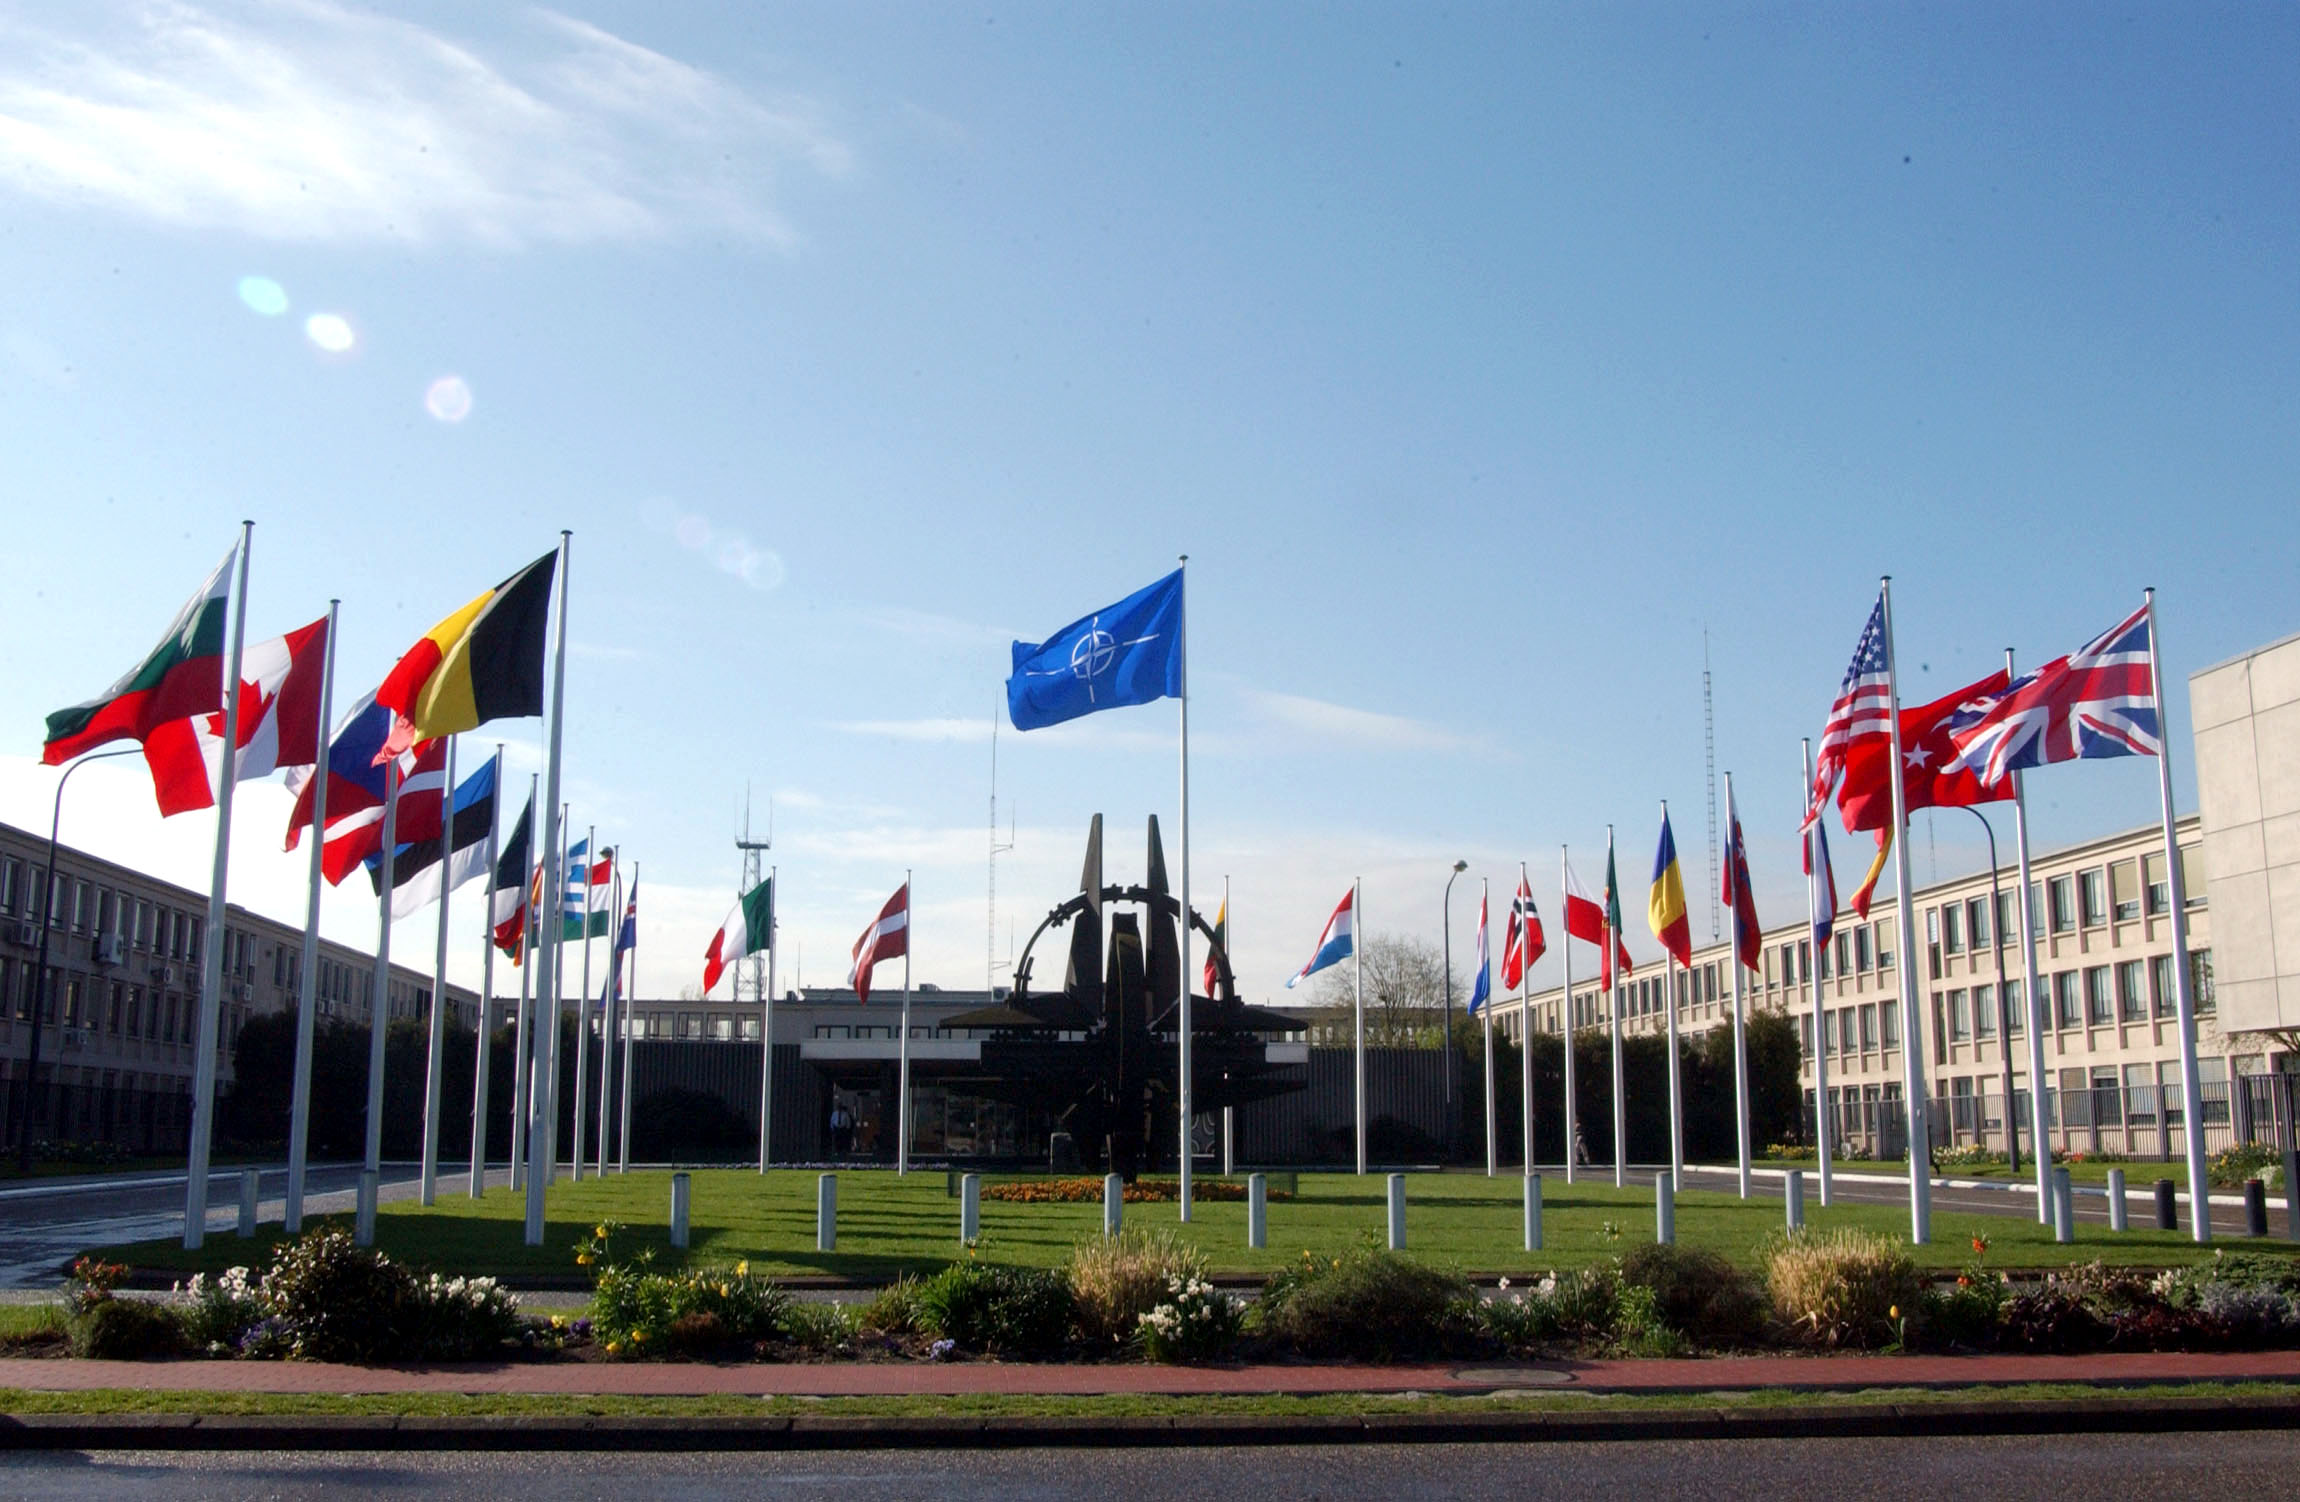 April 2004

Flags of the 26 member countries of NATO,
NATO Headquarters, Brussels, Belgium.